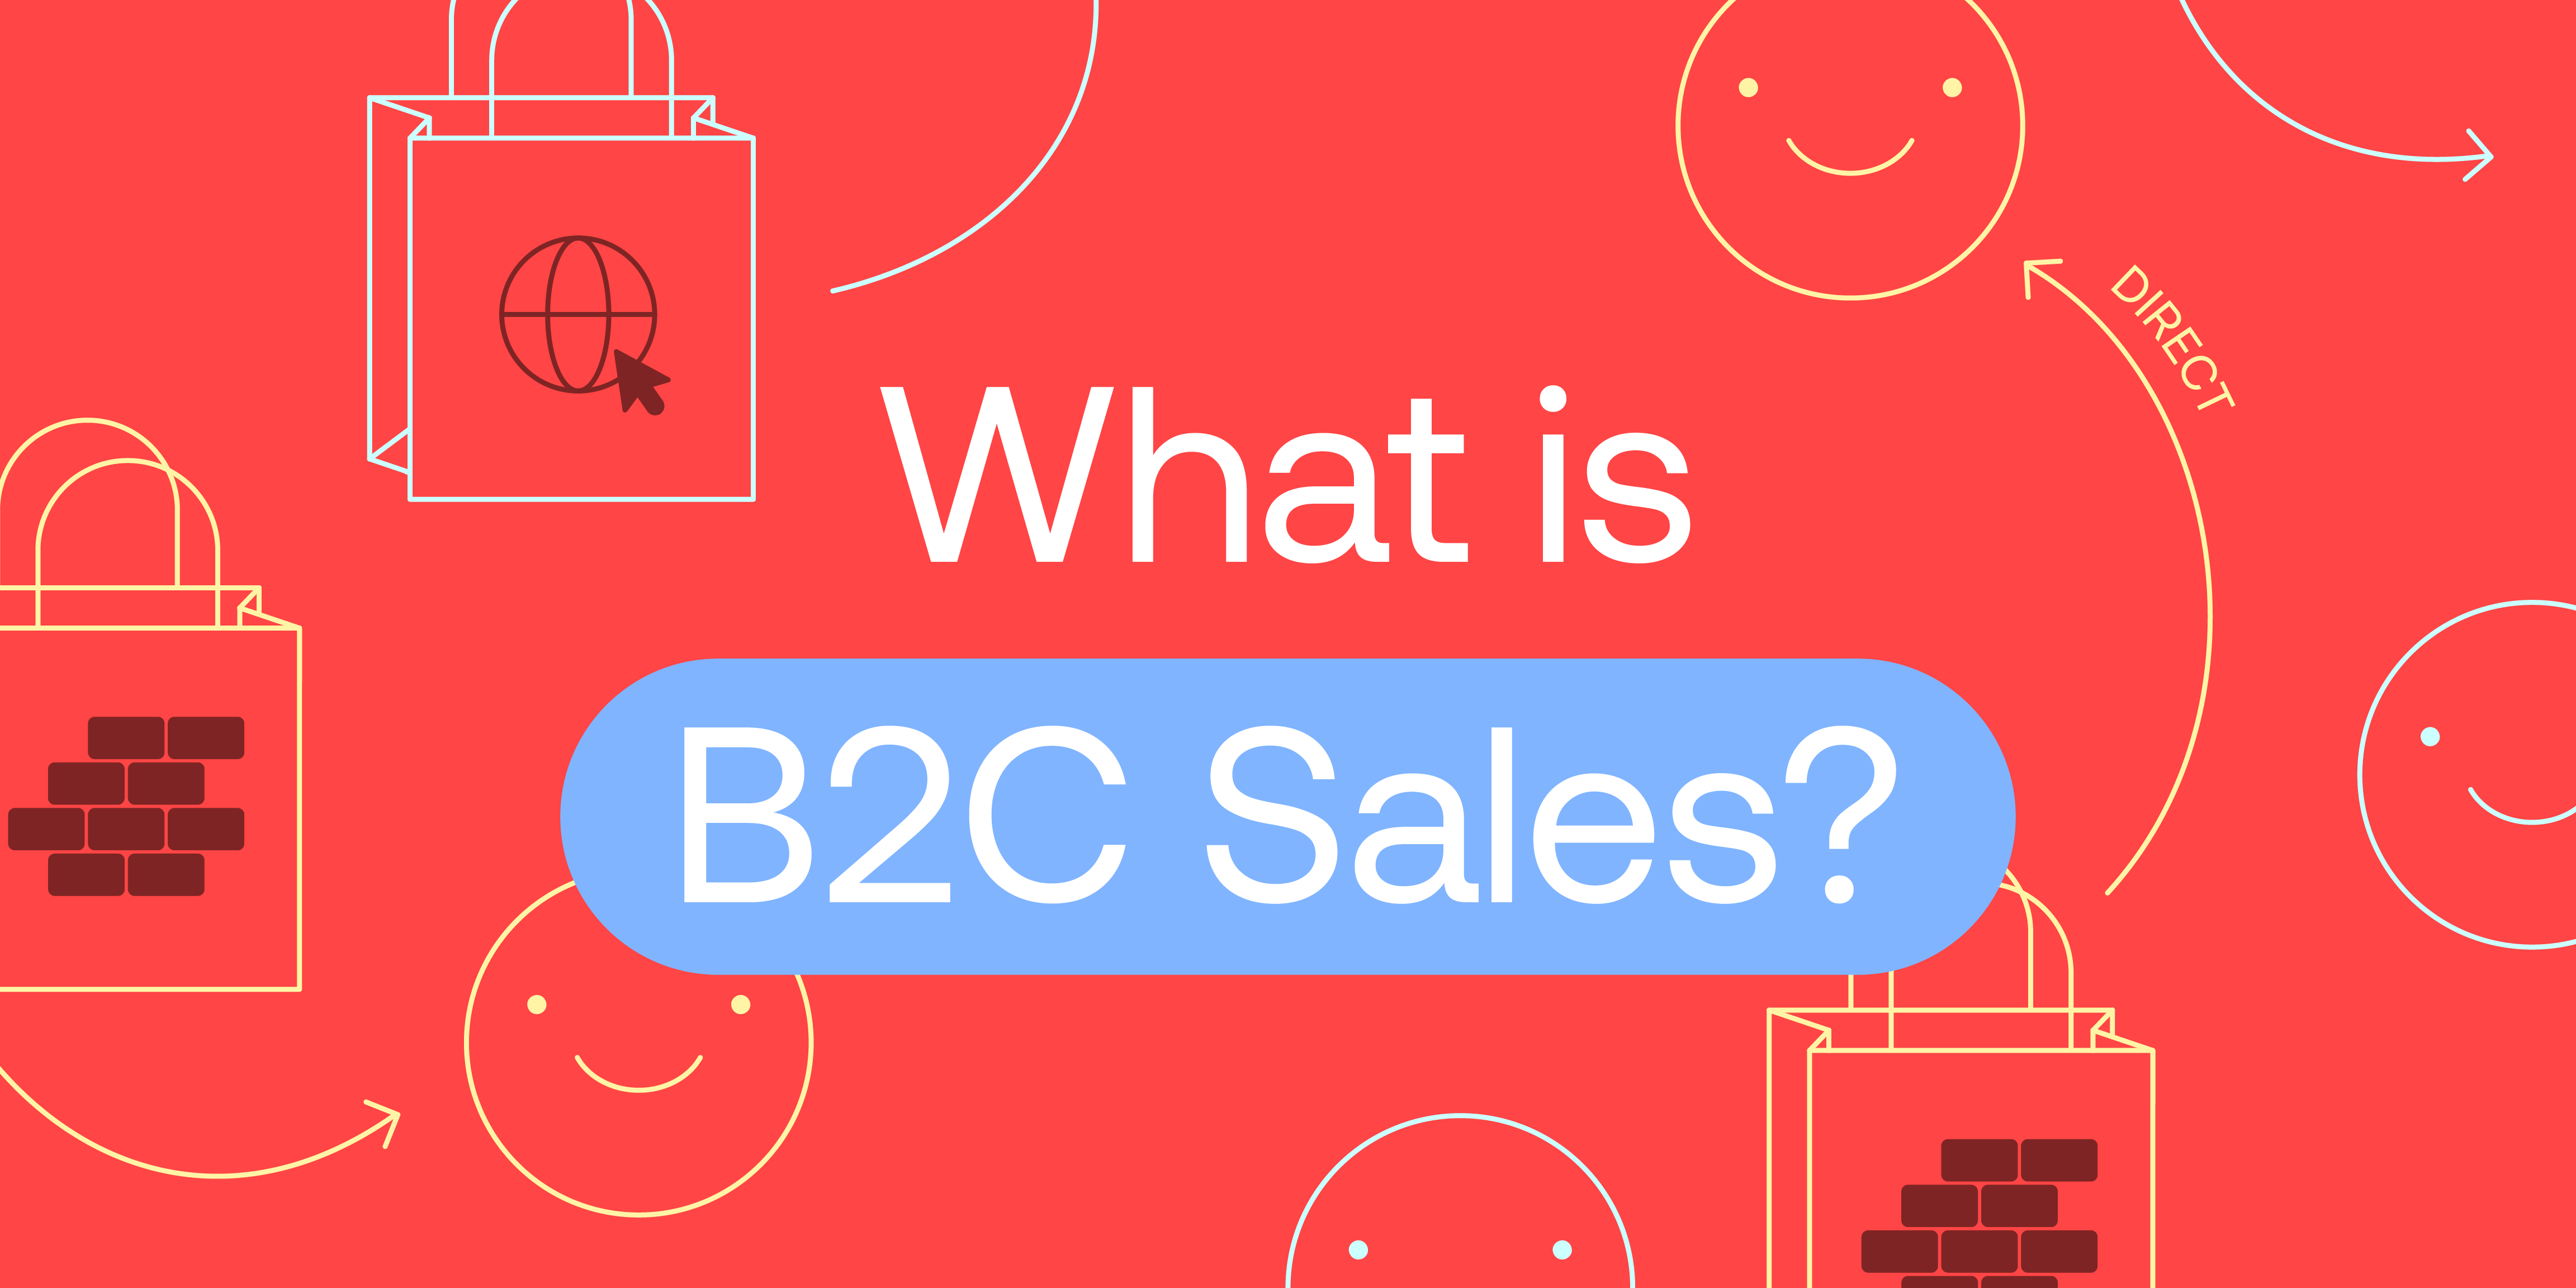 Definition of B2C Sales (Business to Consumer Sales) - what is b2c sales?